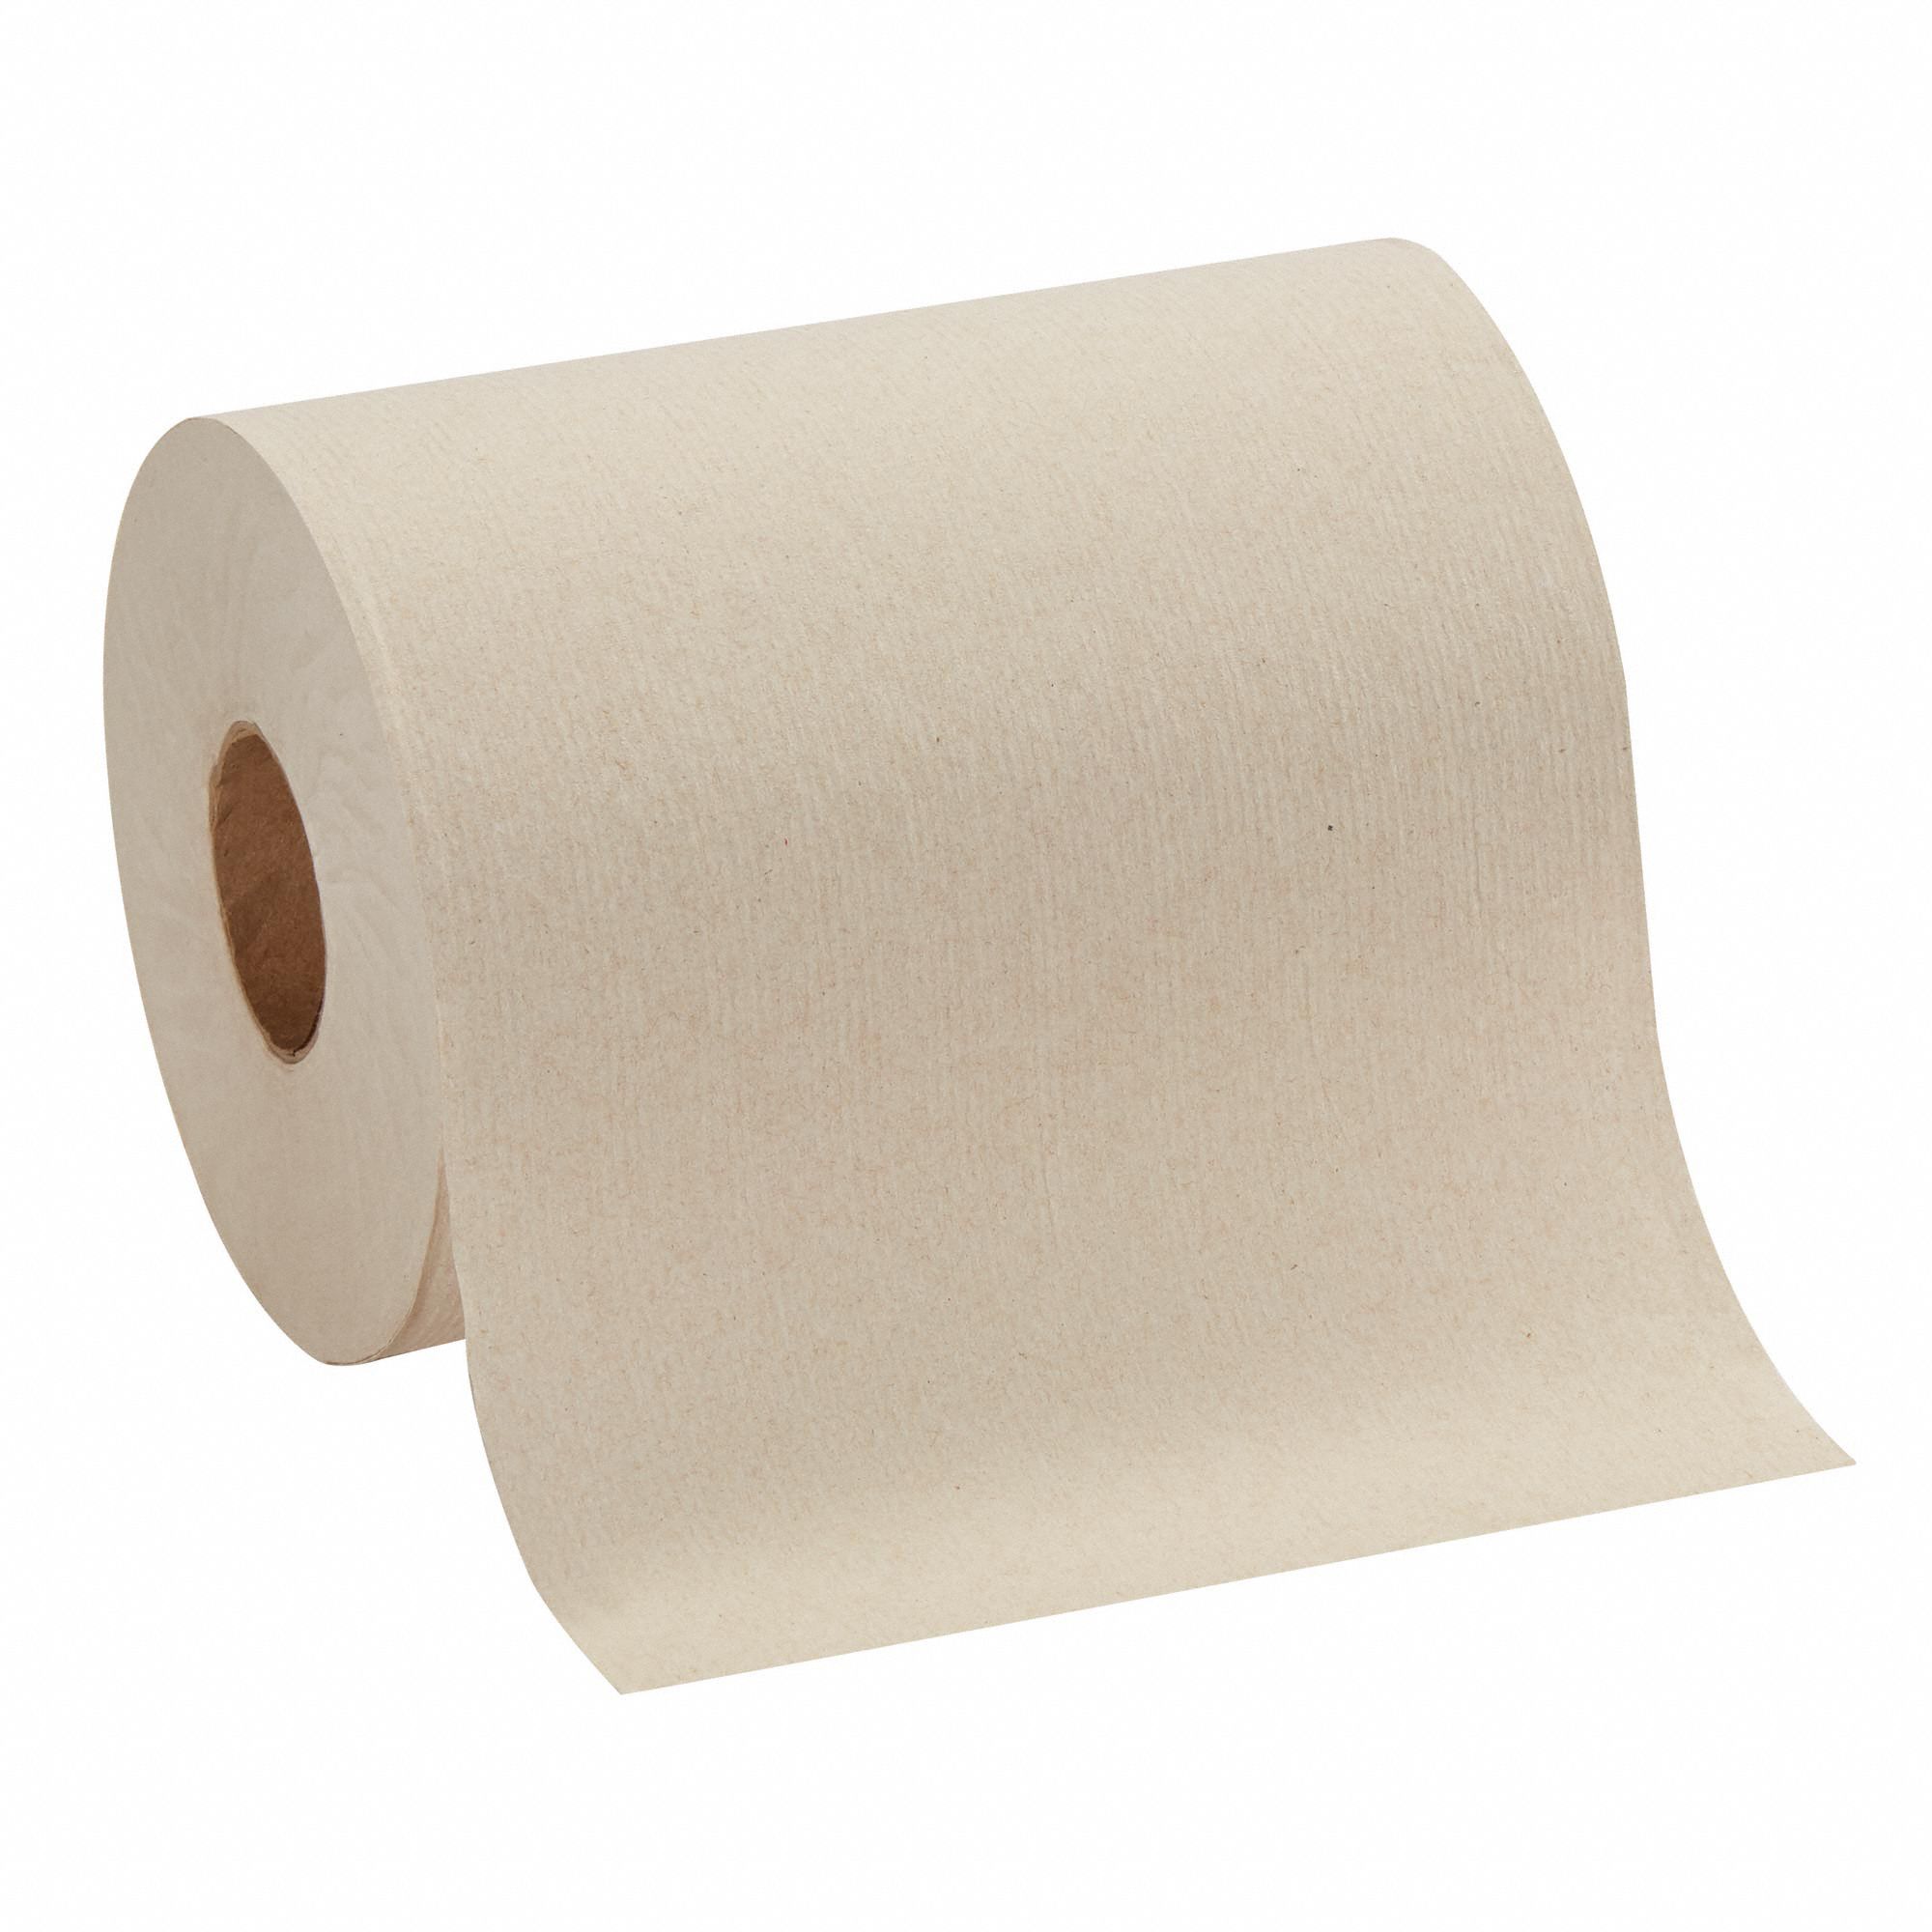 Paper Towel Roll: Brown, 7 13/16 in Roll Wd, 500 ft Roll Lg, Hardwound, 12 PK